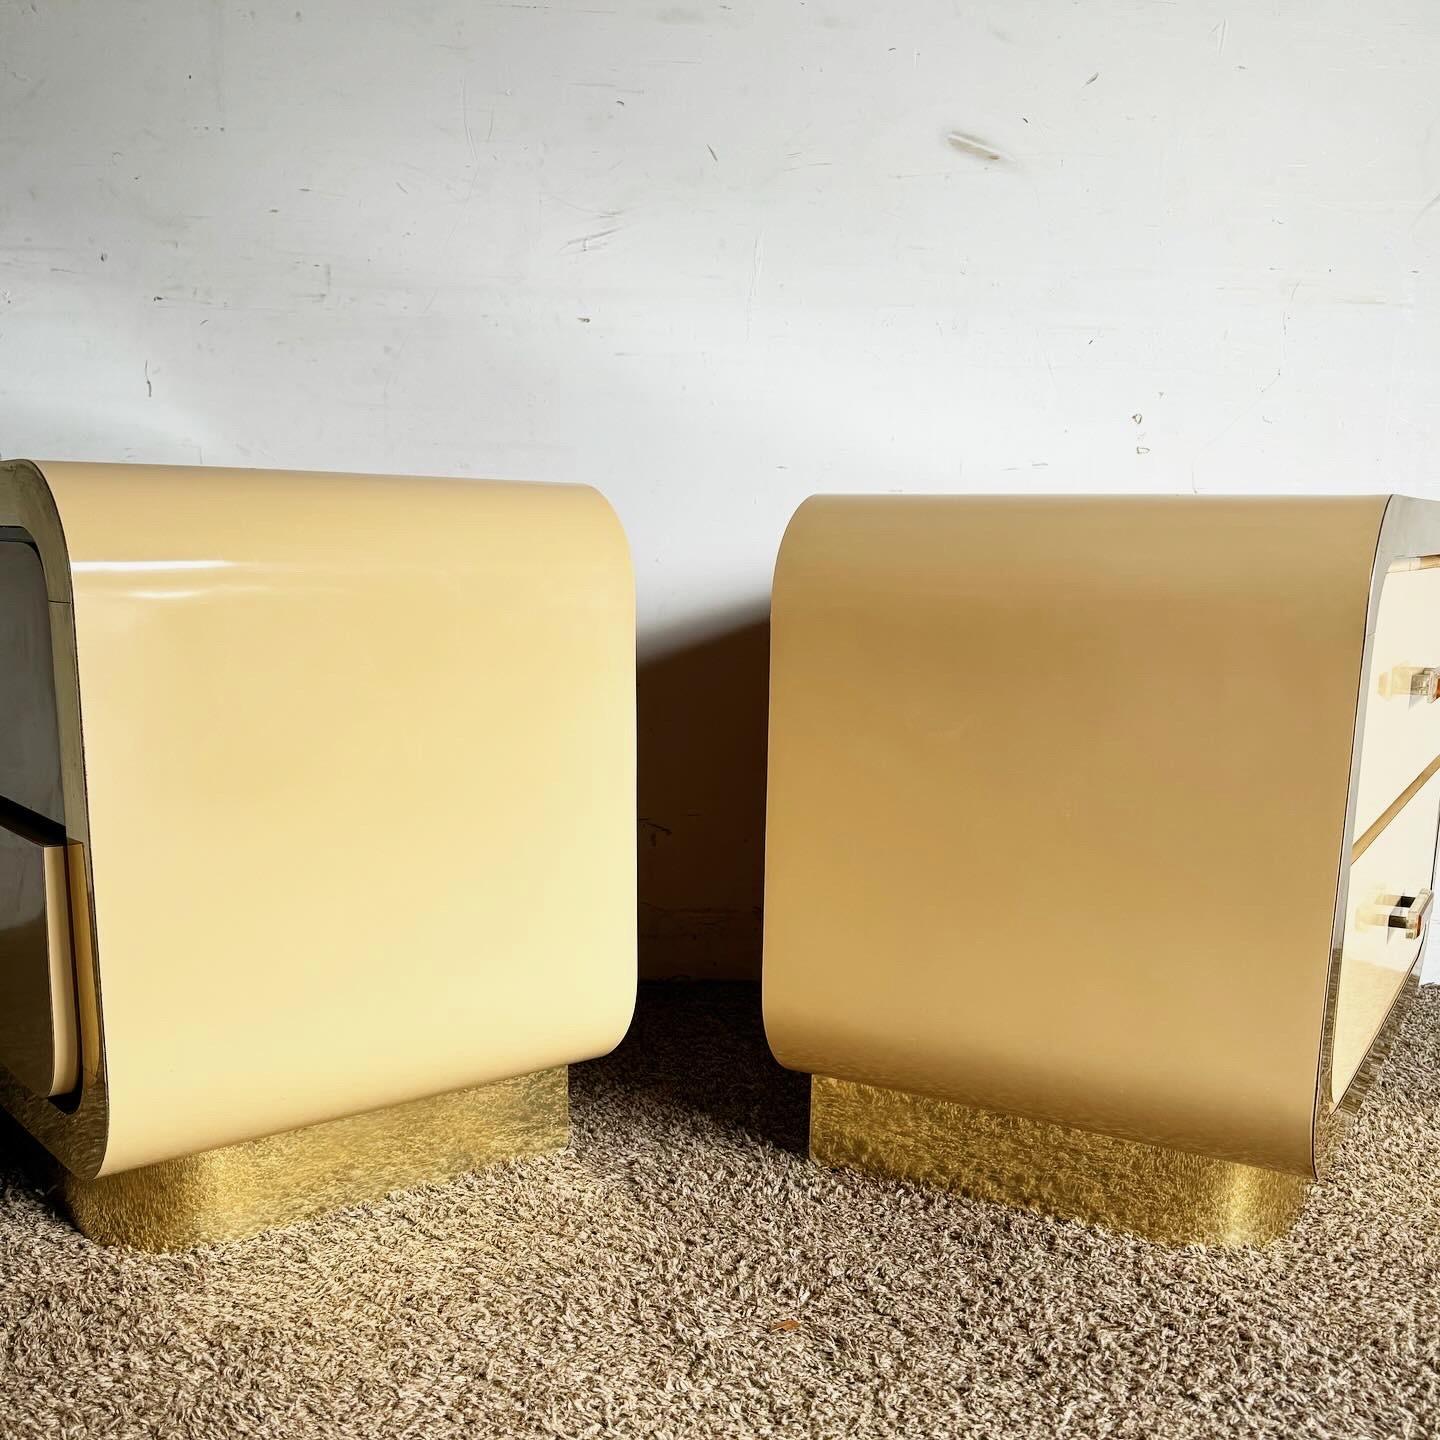 Postmodern Flesh Lacquer Laminate Waterfall Nightstands With Gold Accents - Pair In Good Condition For Sale In Delray Beach, FL